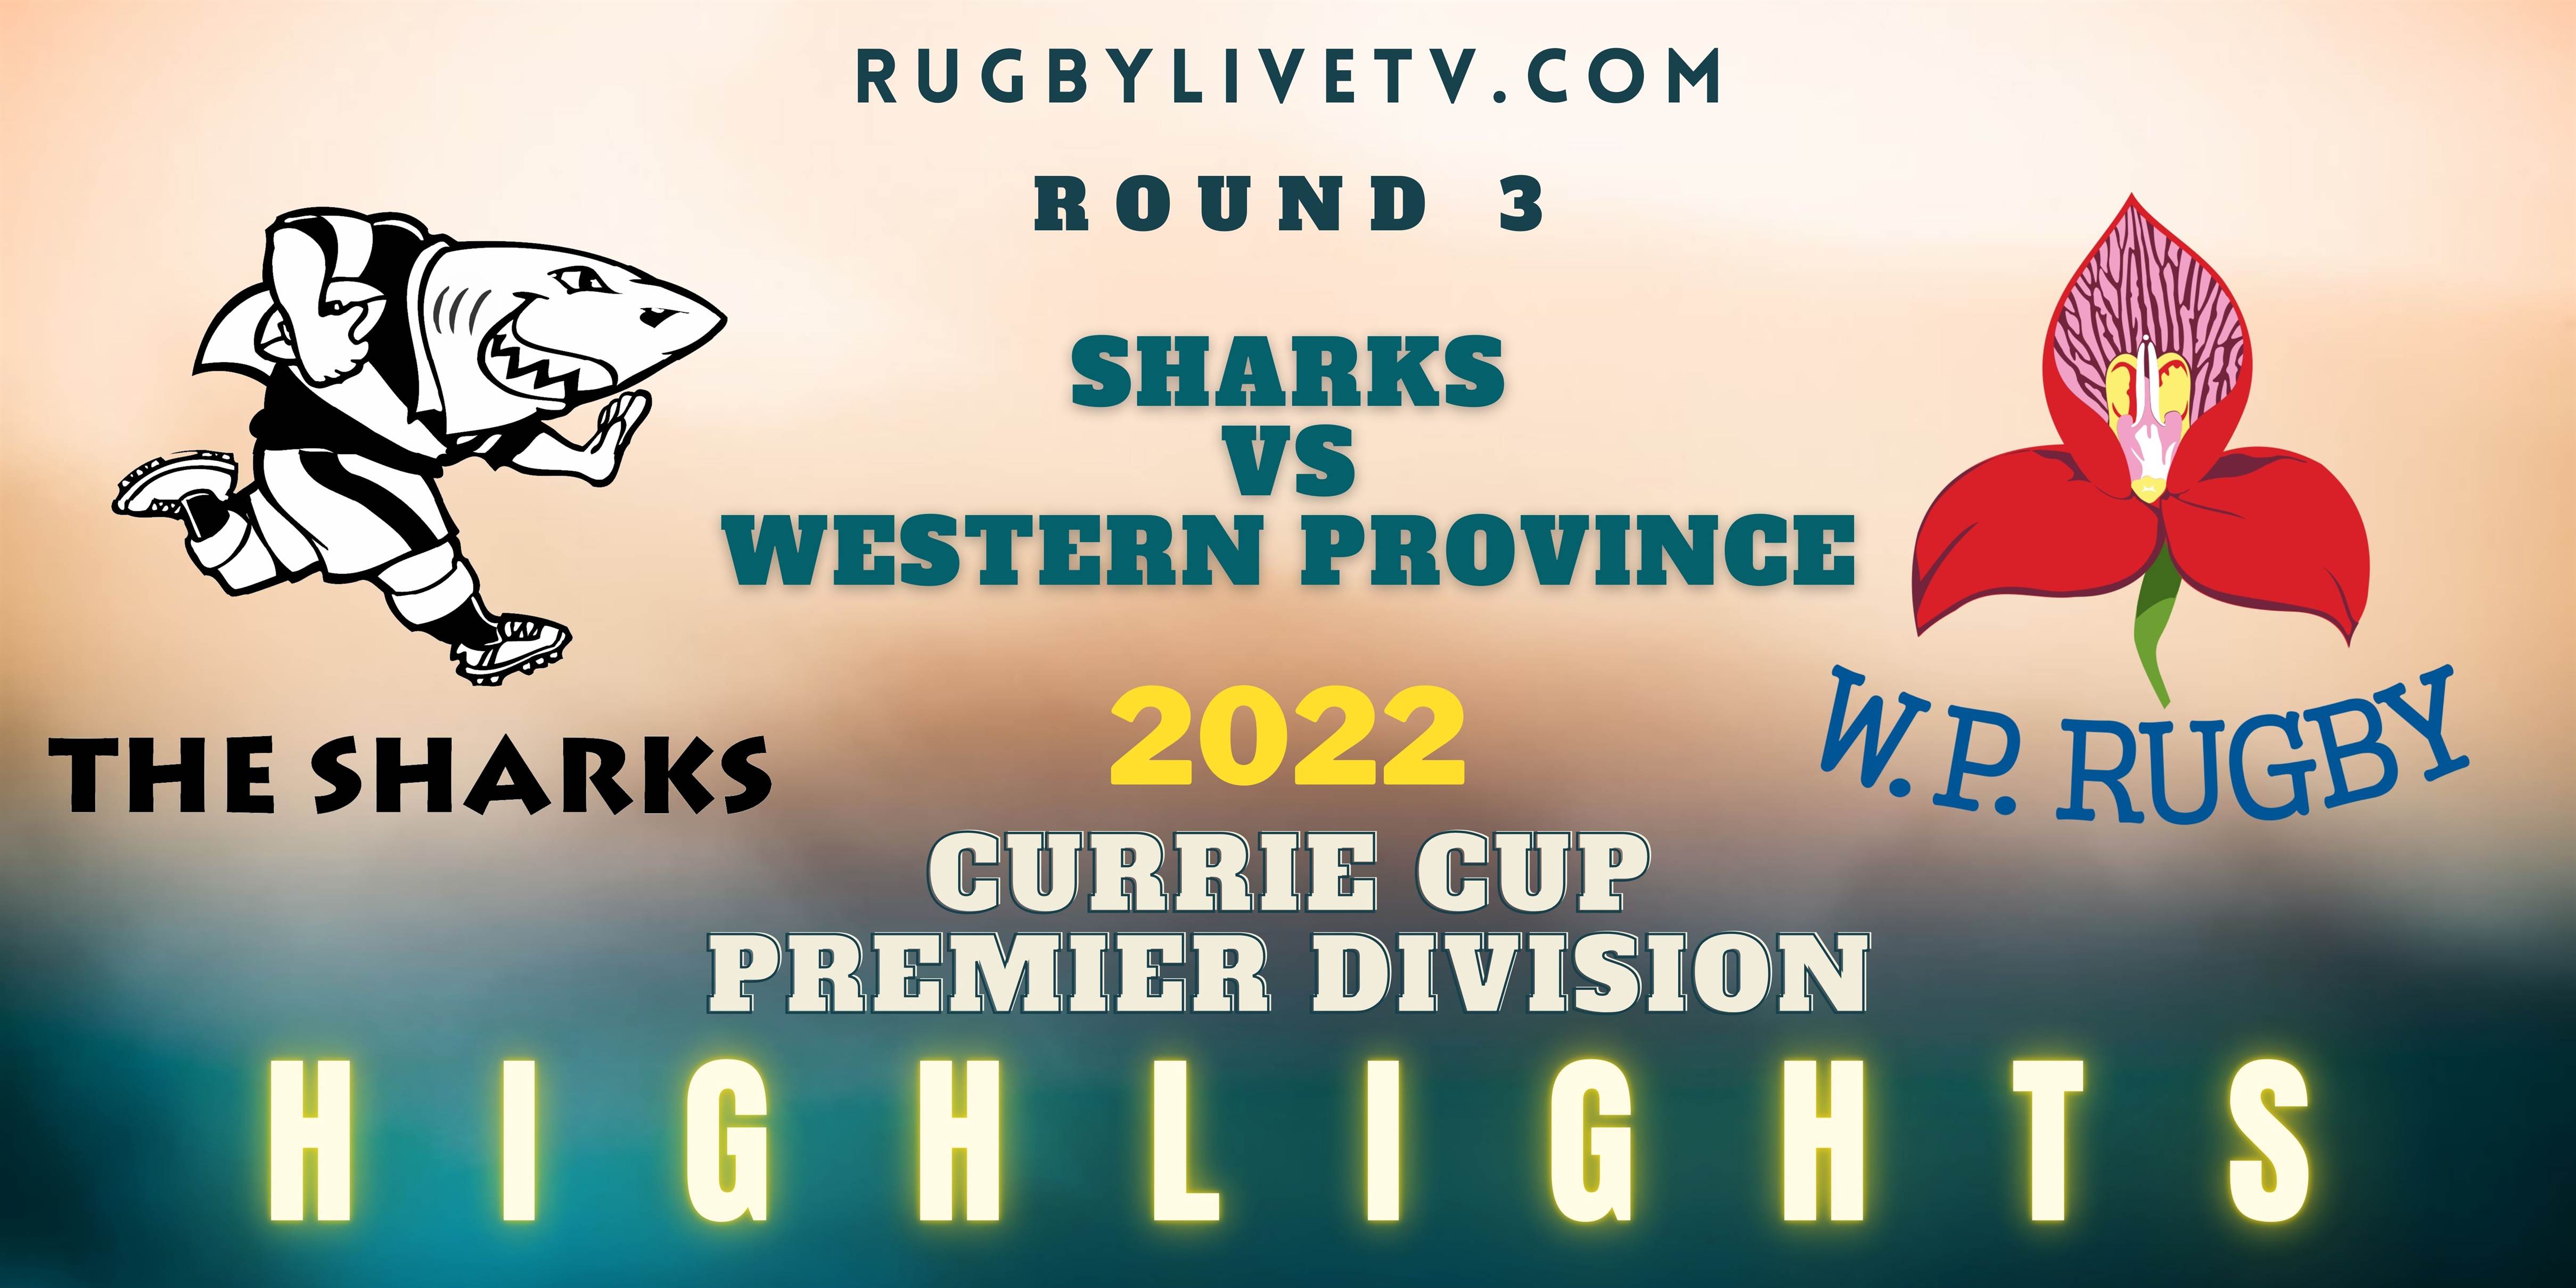 Sharks Vs Western Province Currie Cup Highlights 2022 Rd 3